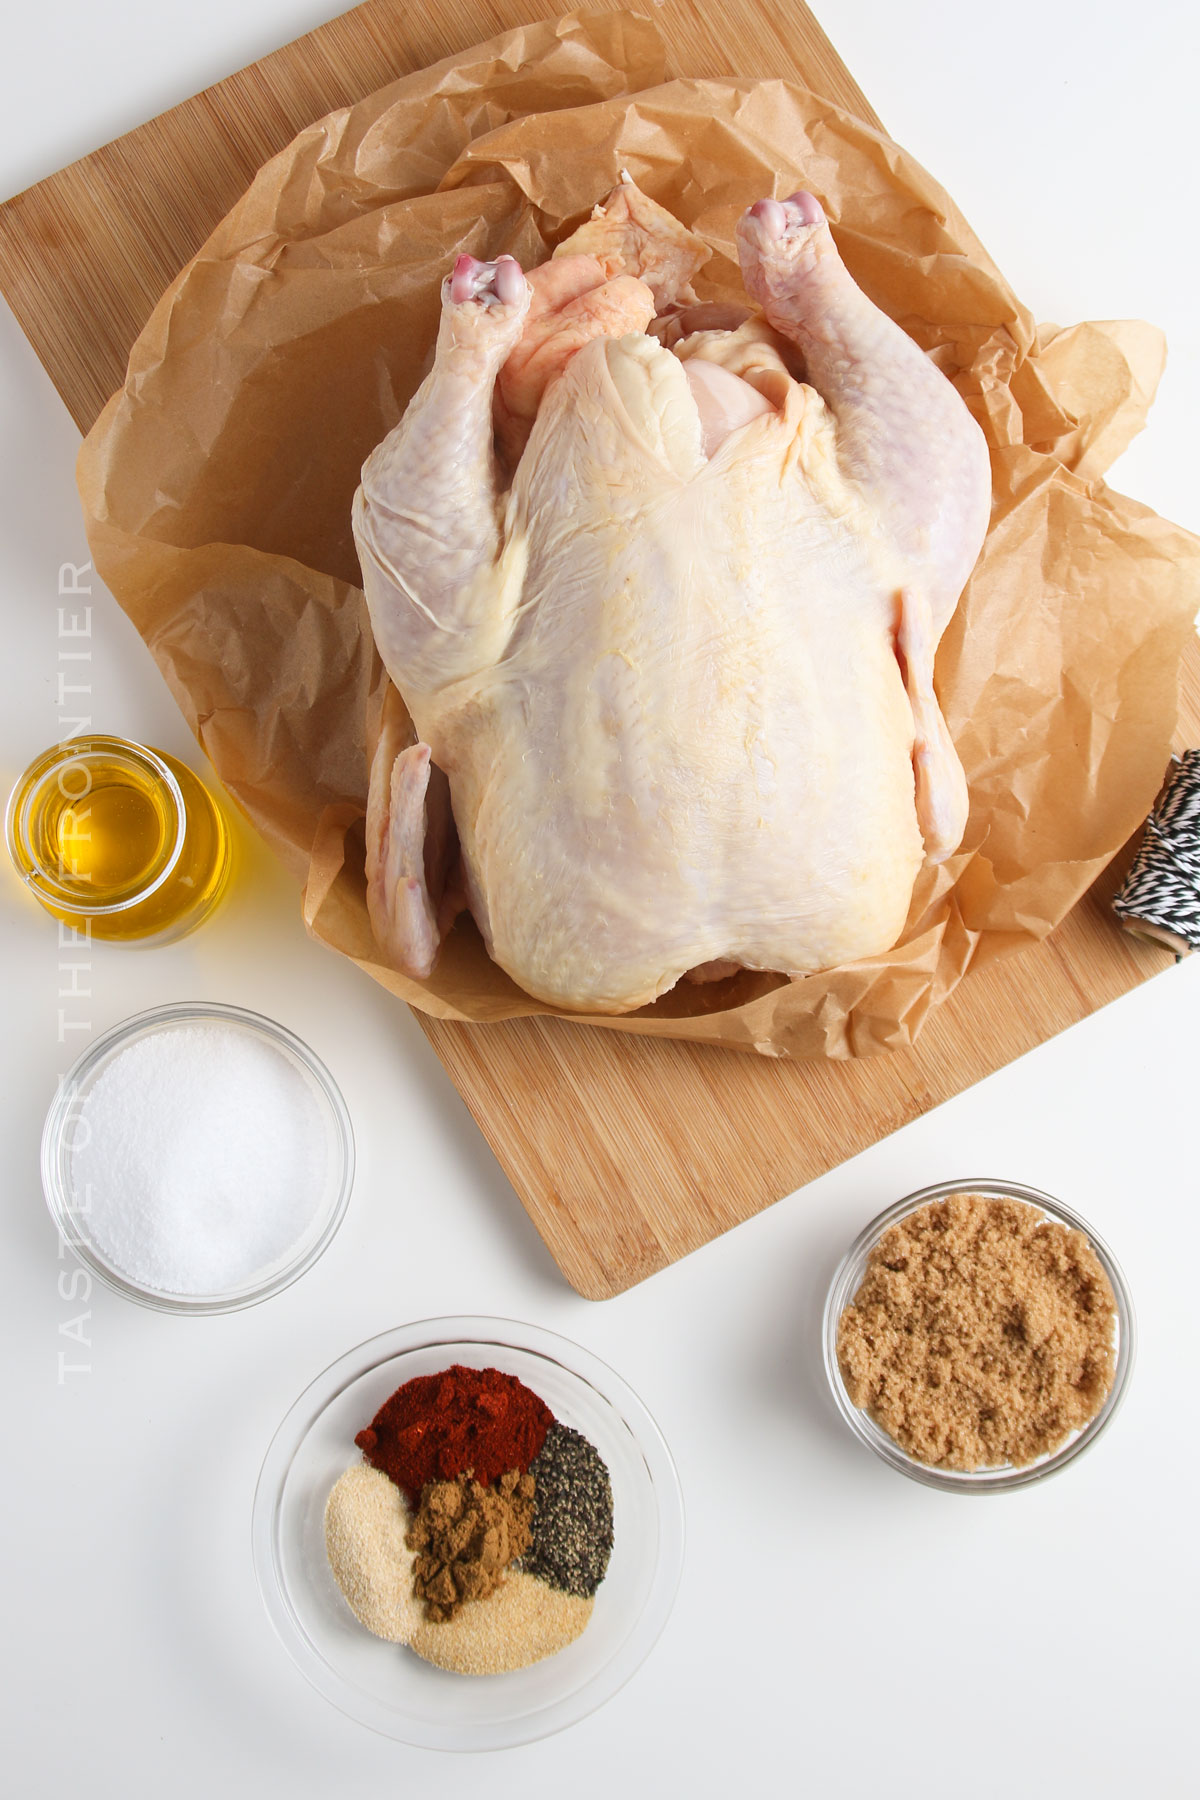 Smoked Whole Chicken ingredients